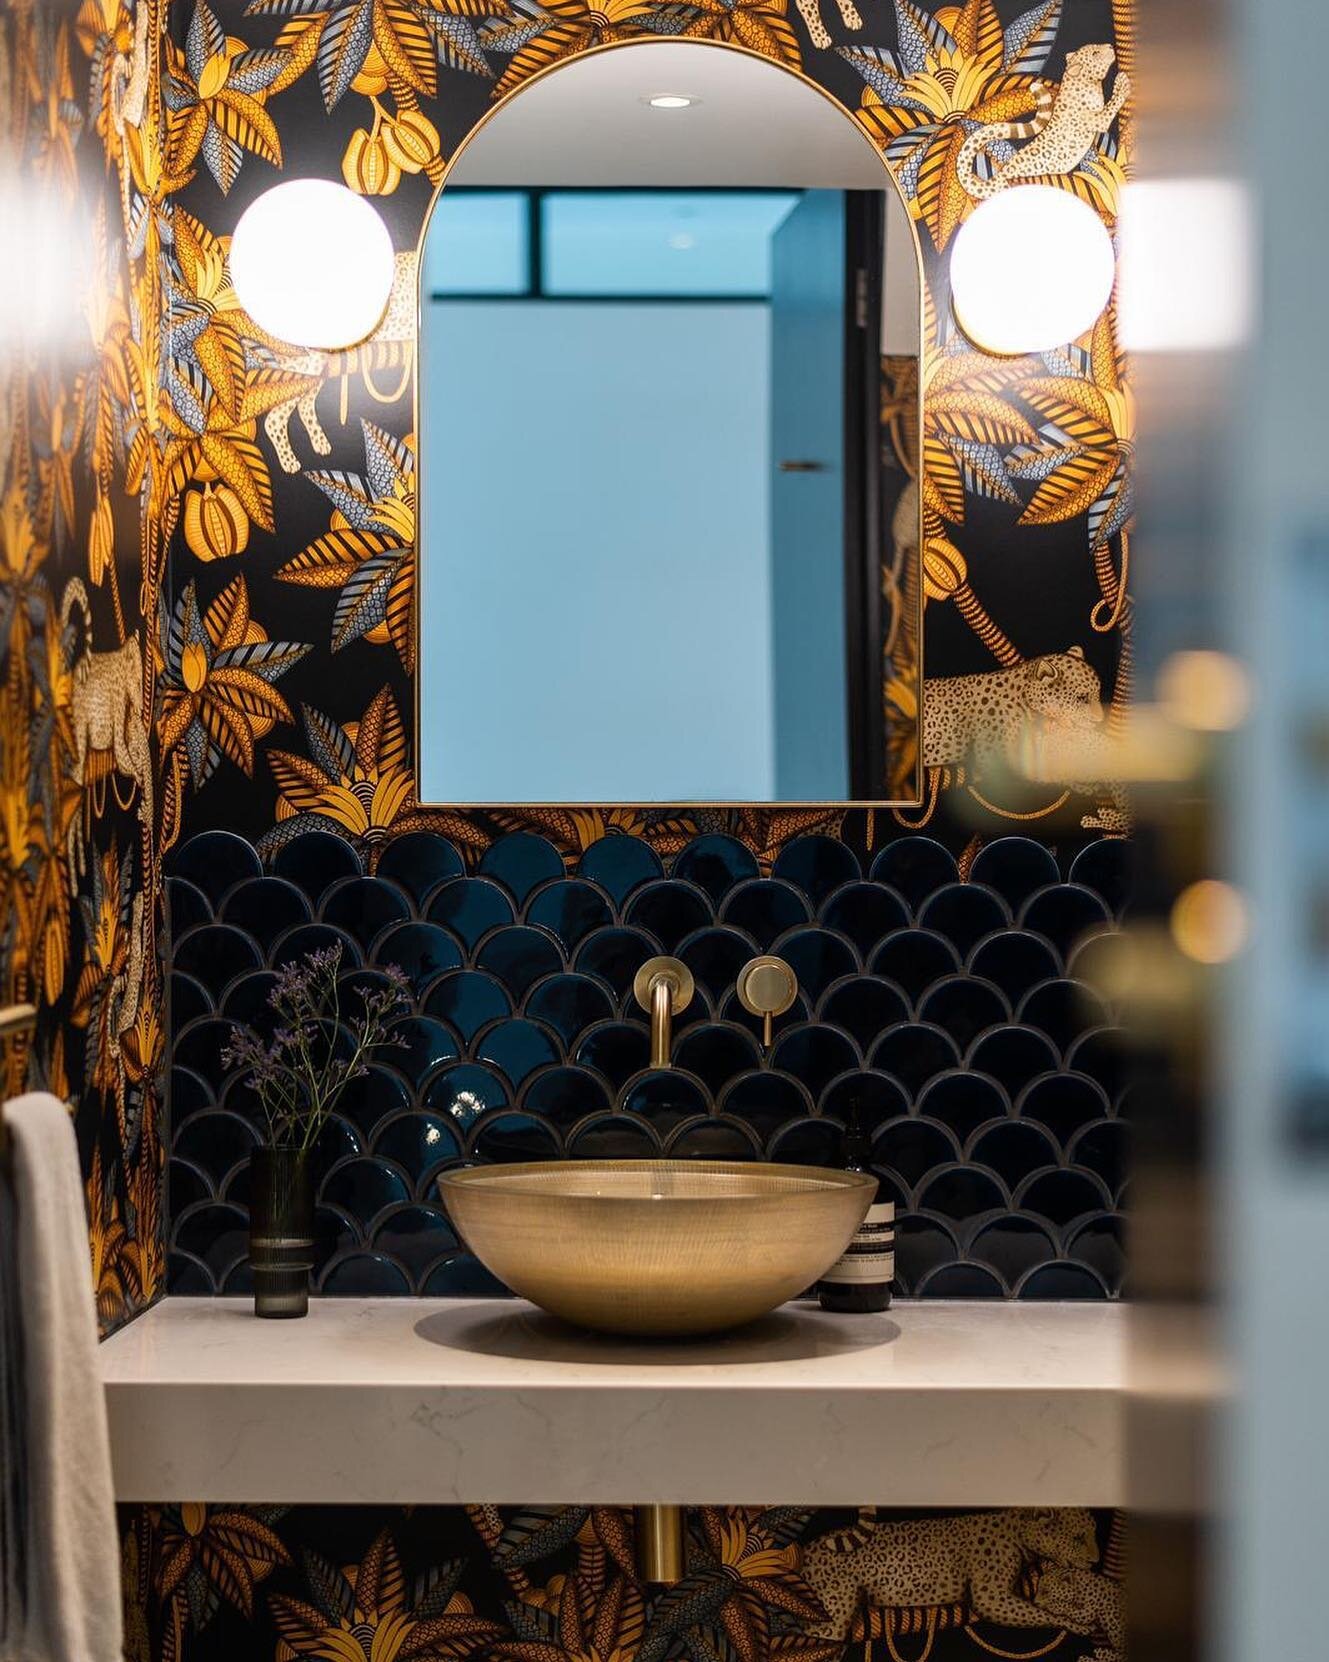 Adding opulence and ambience with tile, lighting and wallpaper choices.

Interior design: @colour_interiors_ltd 
Architect: @adearchitecture 
Wallpaper: @cole_and_son_wallpapers
Basin and taps: @cphartbathrooms 
Tiles: @artisansofdevizes 
Mirror: @he